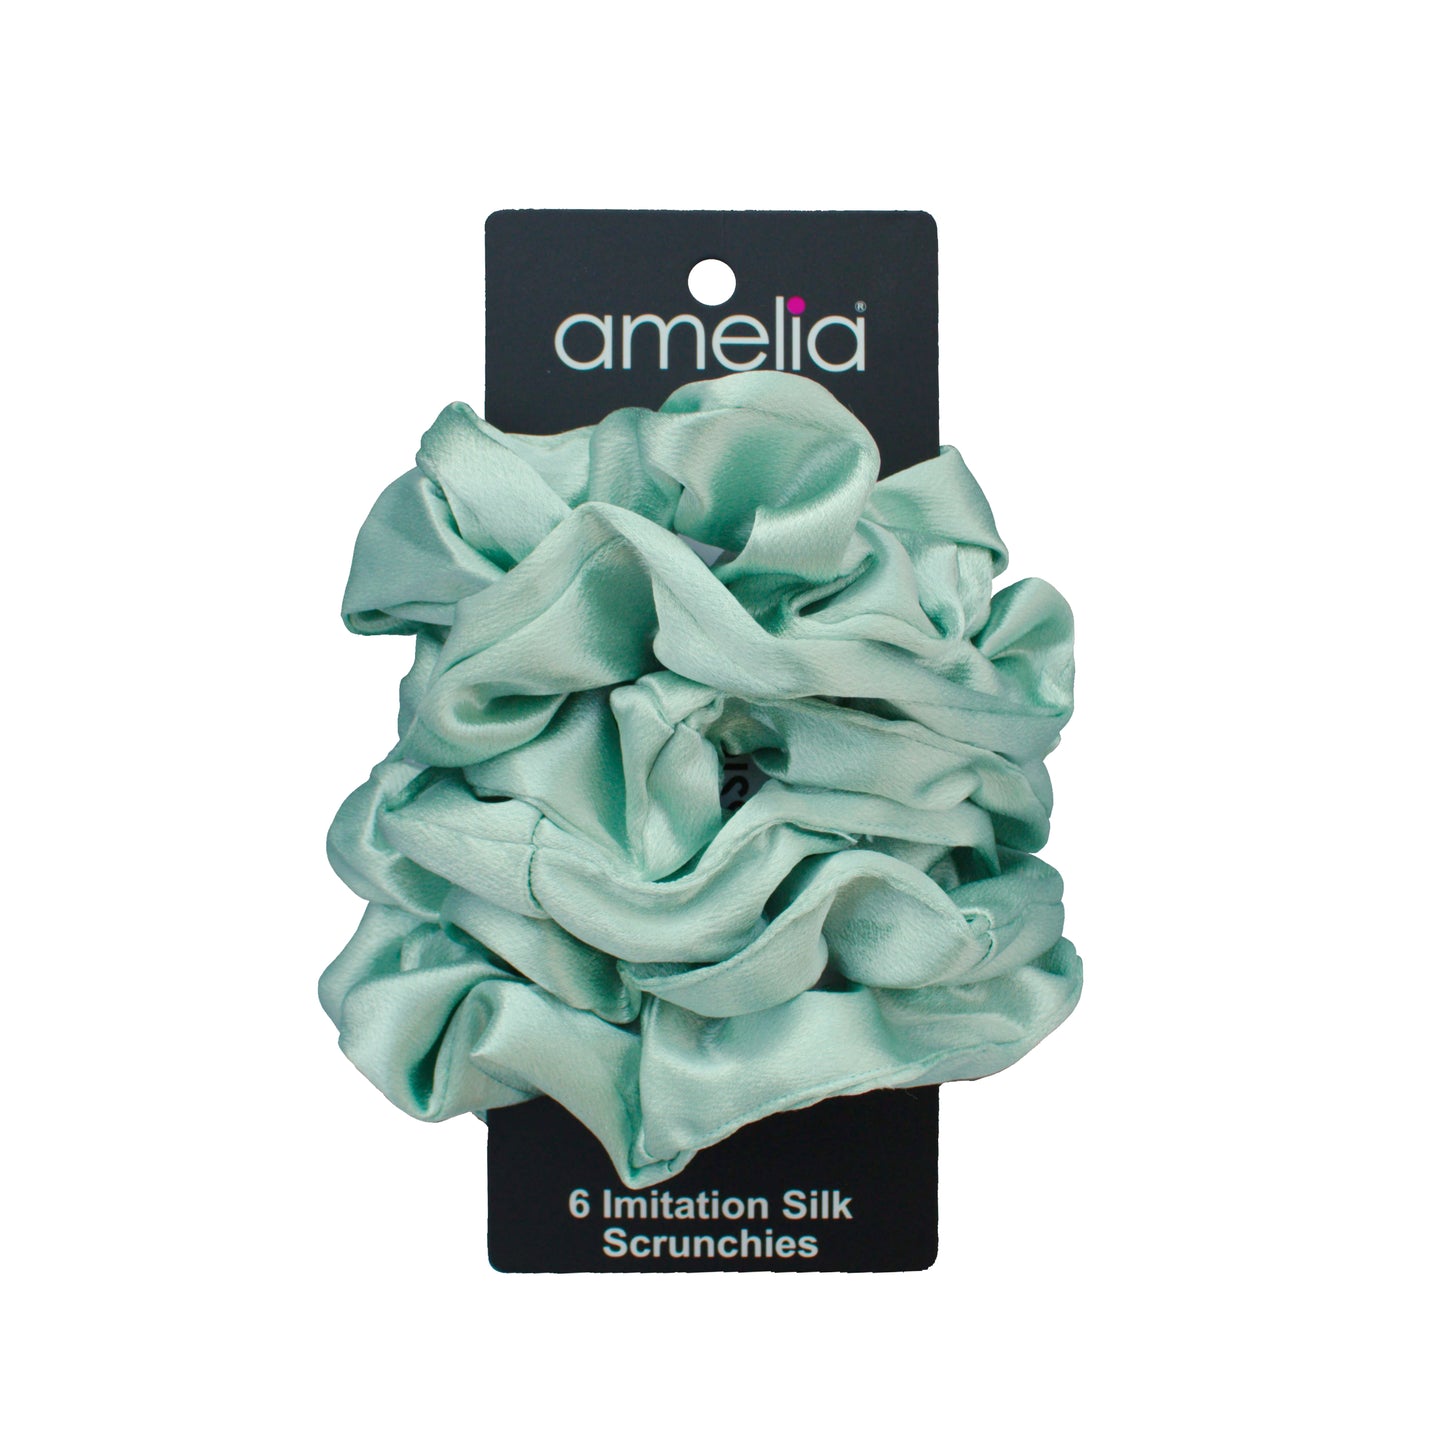 Amelia Beauty, Pastel Green, 4.5in Diameter Imitation Silk Scrunchies, Gentle on Hair, Strong Hold, No Snag, No Dents or Creases. 6 Pack